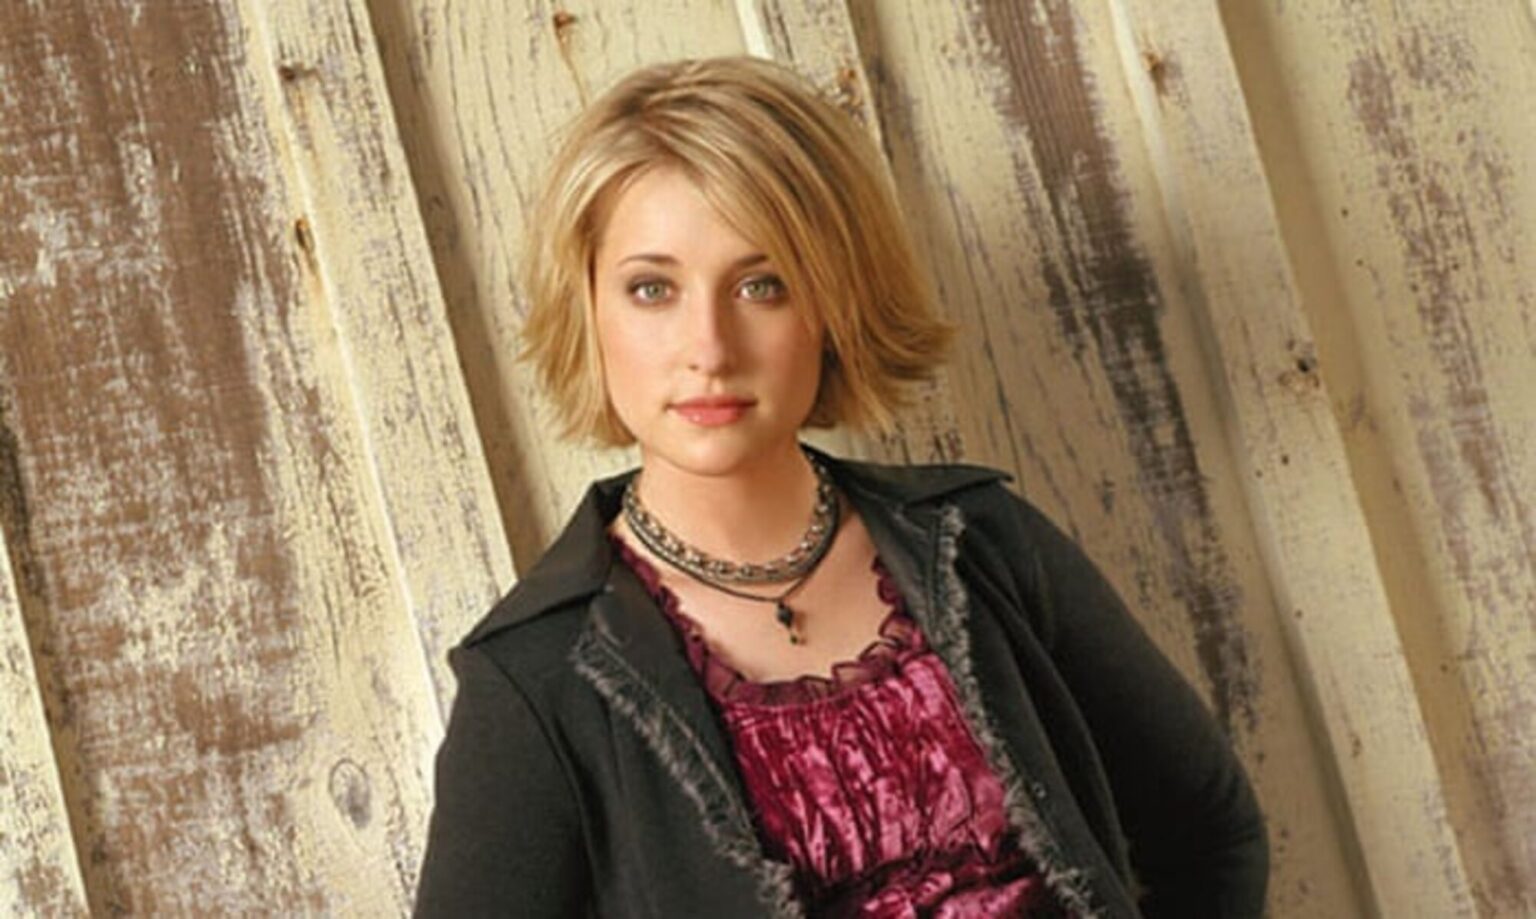 'Smallville' actress Allison Mack went from a CW star to a notorious cult leader. How in the world did that happen?